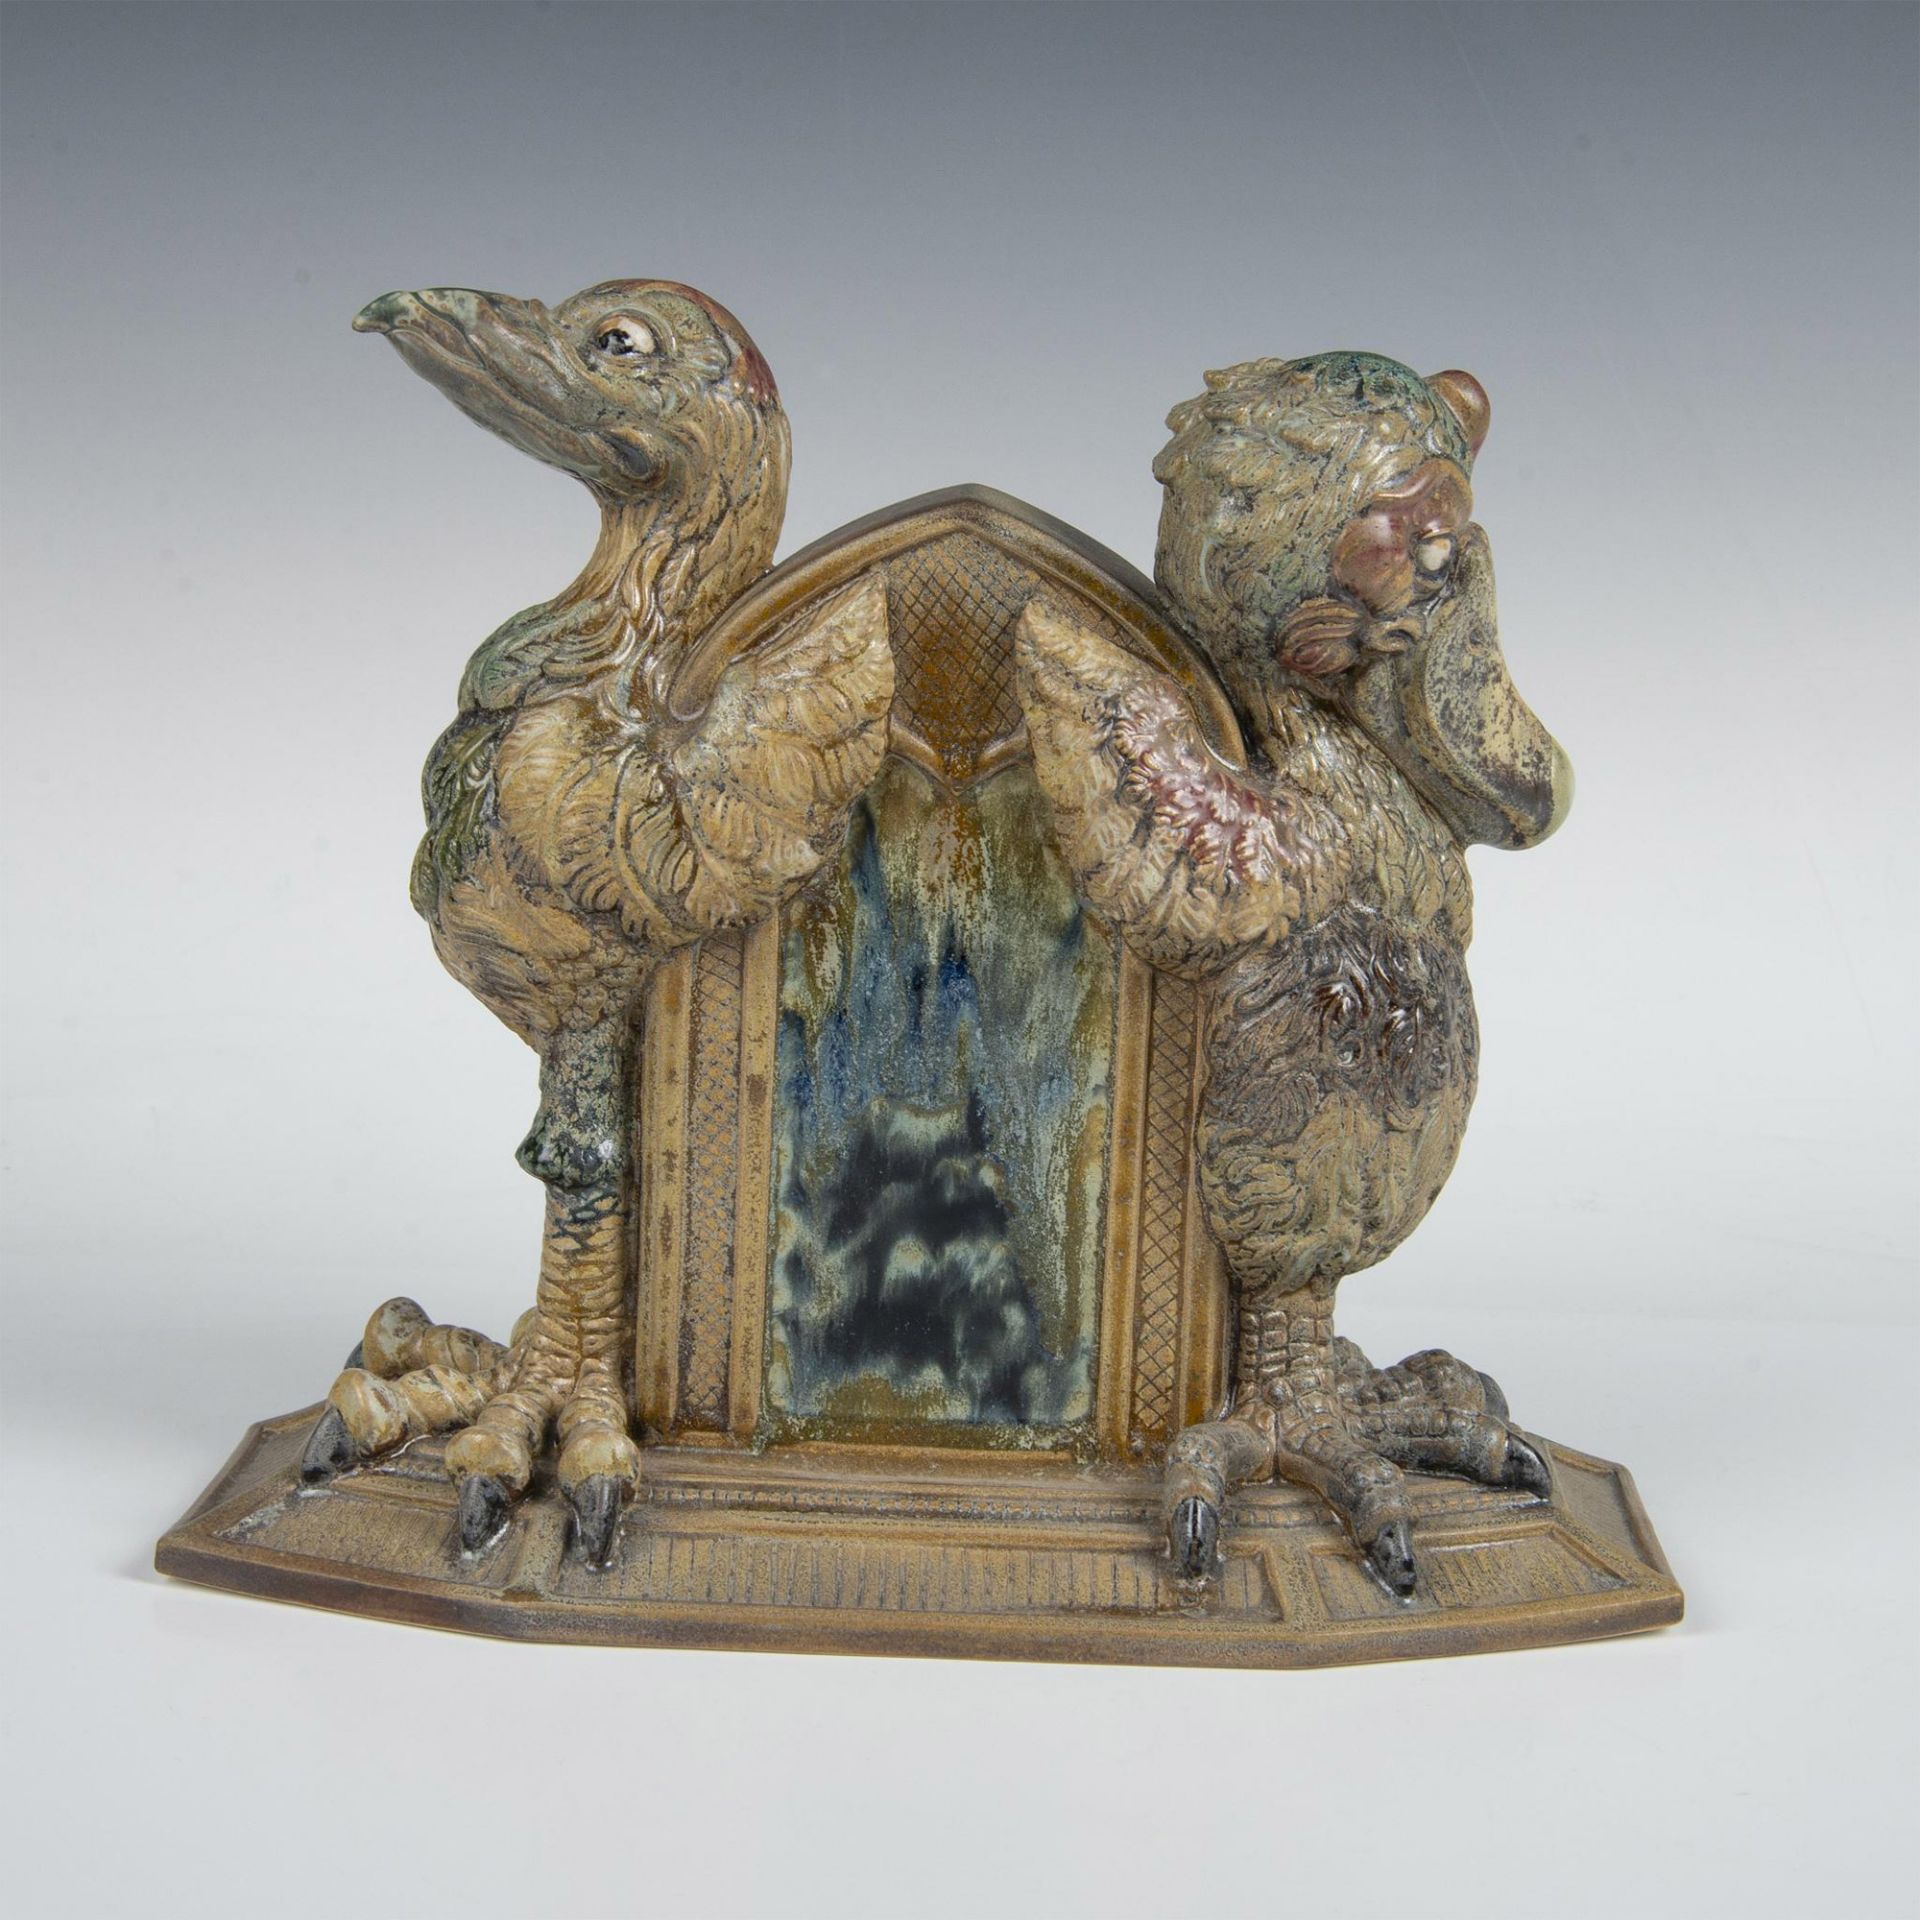 Andrew Hull for Cobridge Stoneware Clock, Caught in Time - Image 6 of 7